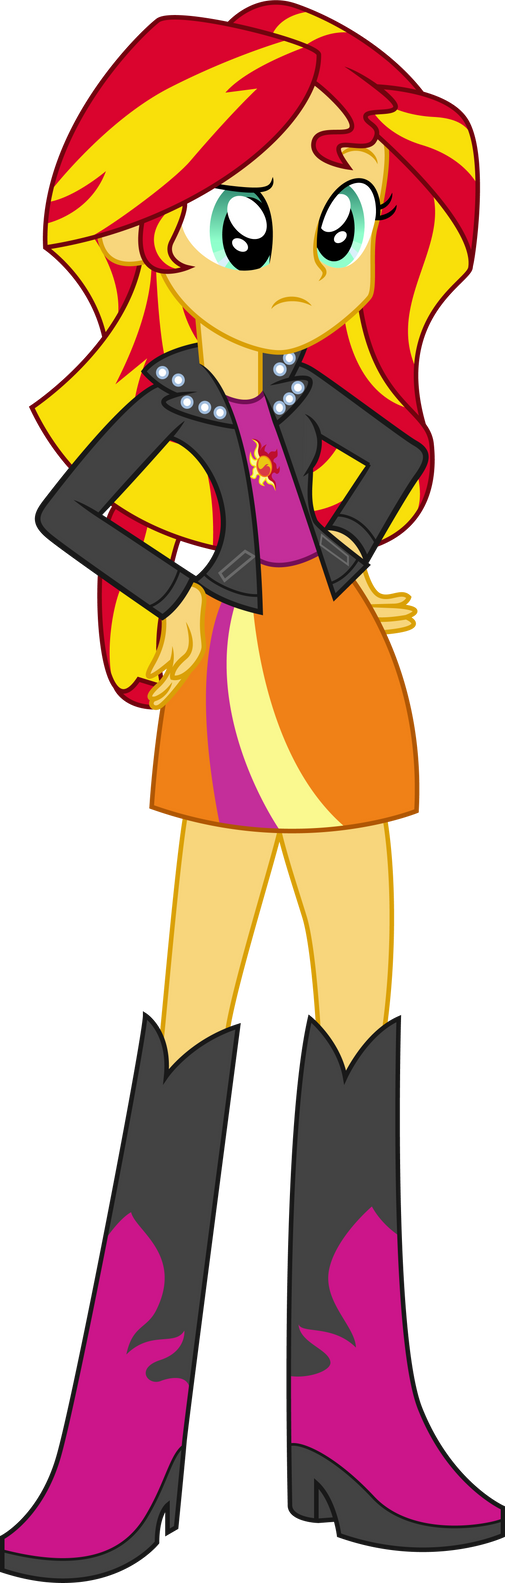 Sunset Shimmer Not Even Close by illumnious